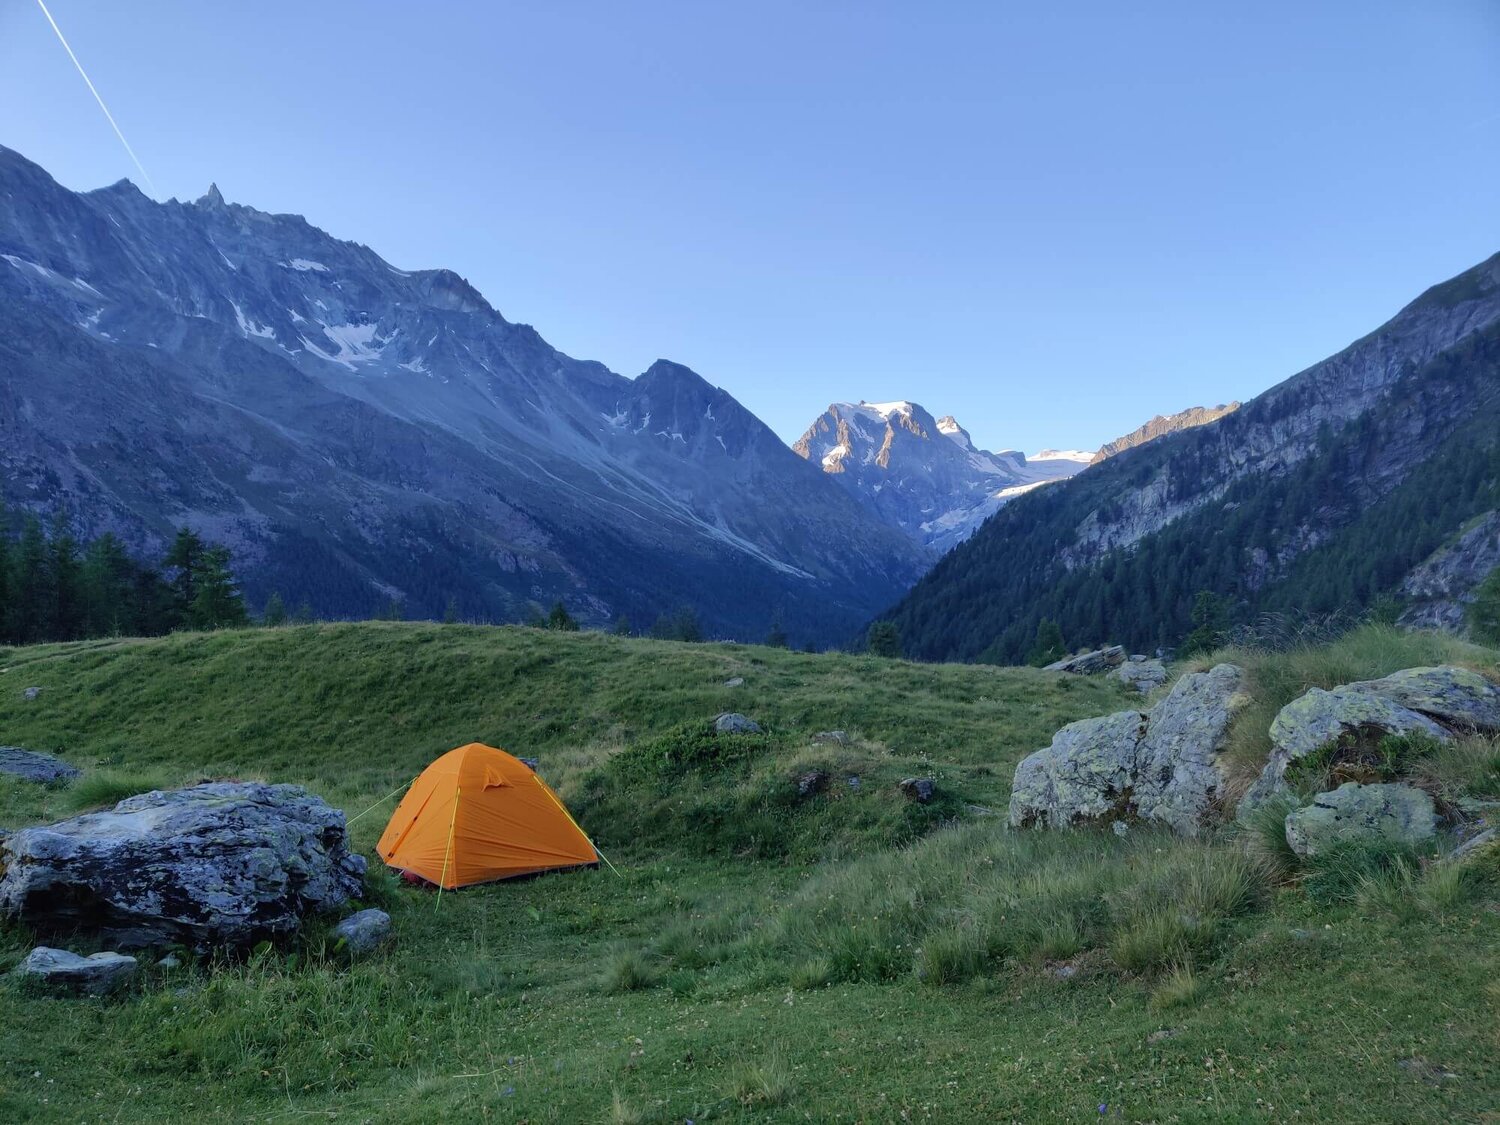 Rules and tips in our Bivouac Guide